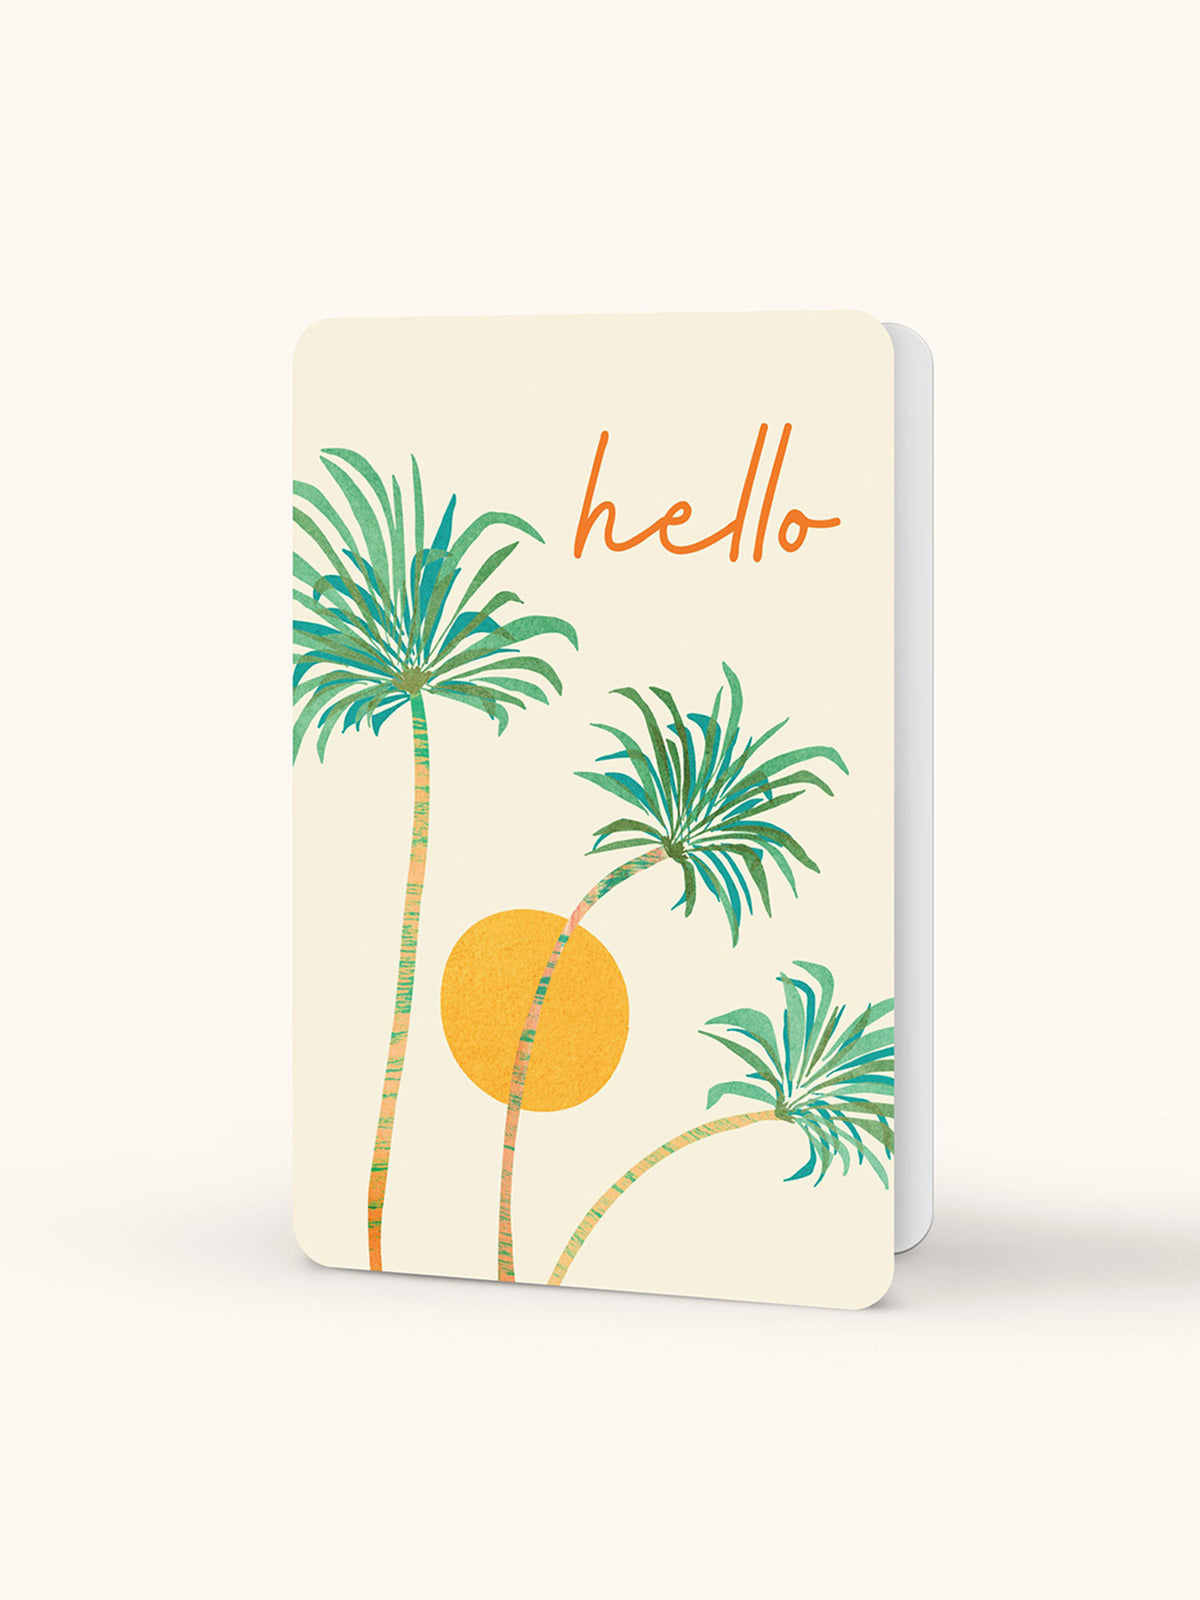 Sunny Hello Note Card Set with Stickers